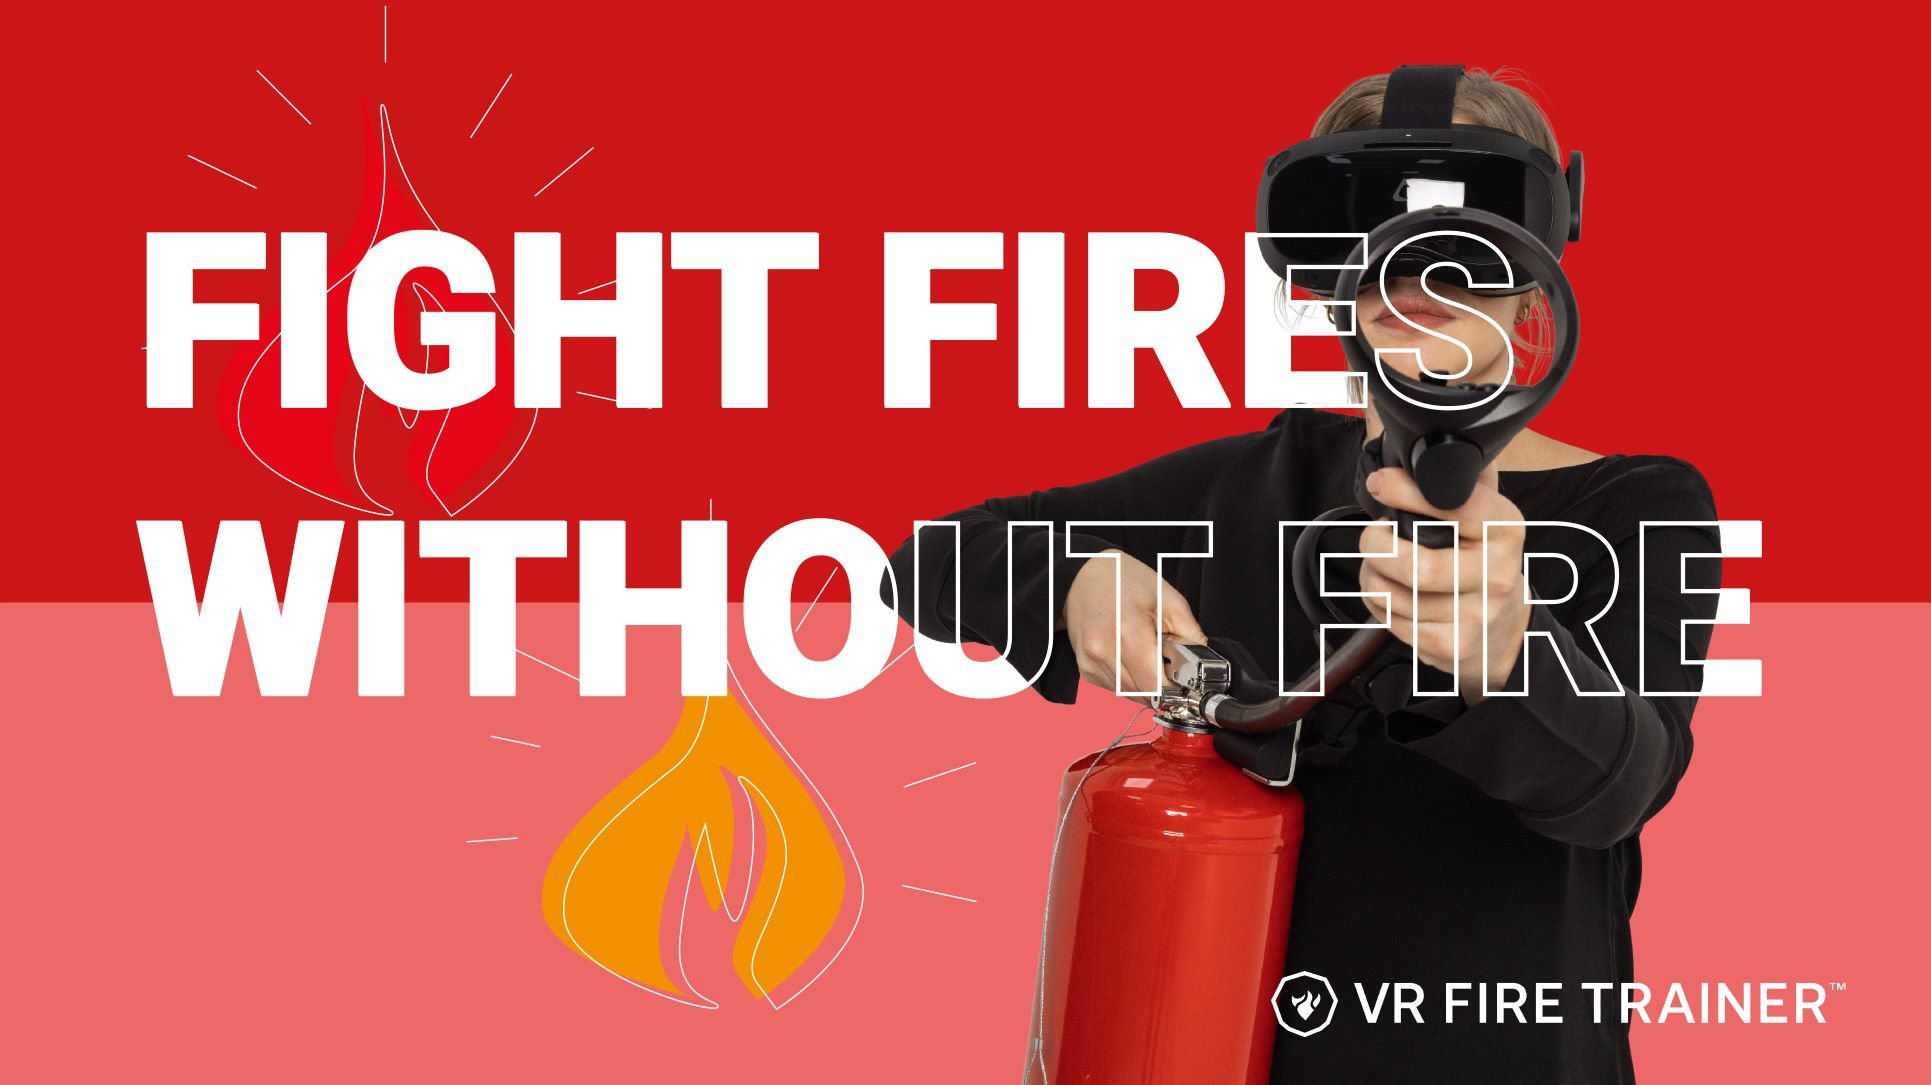 Vobling_Fight fires without fire